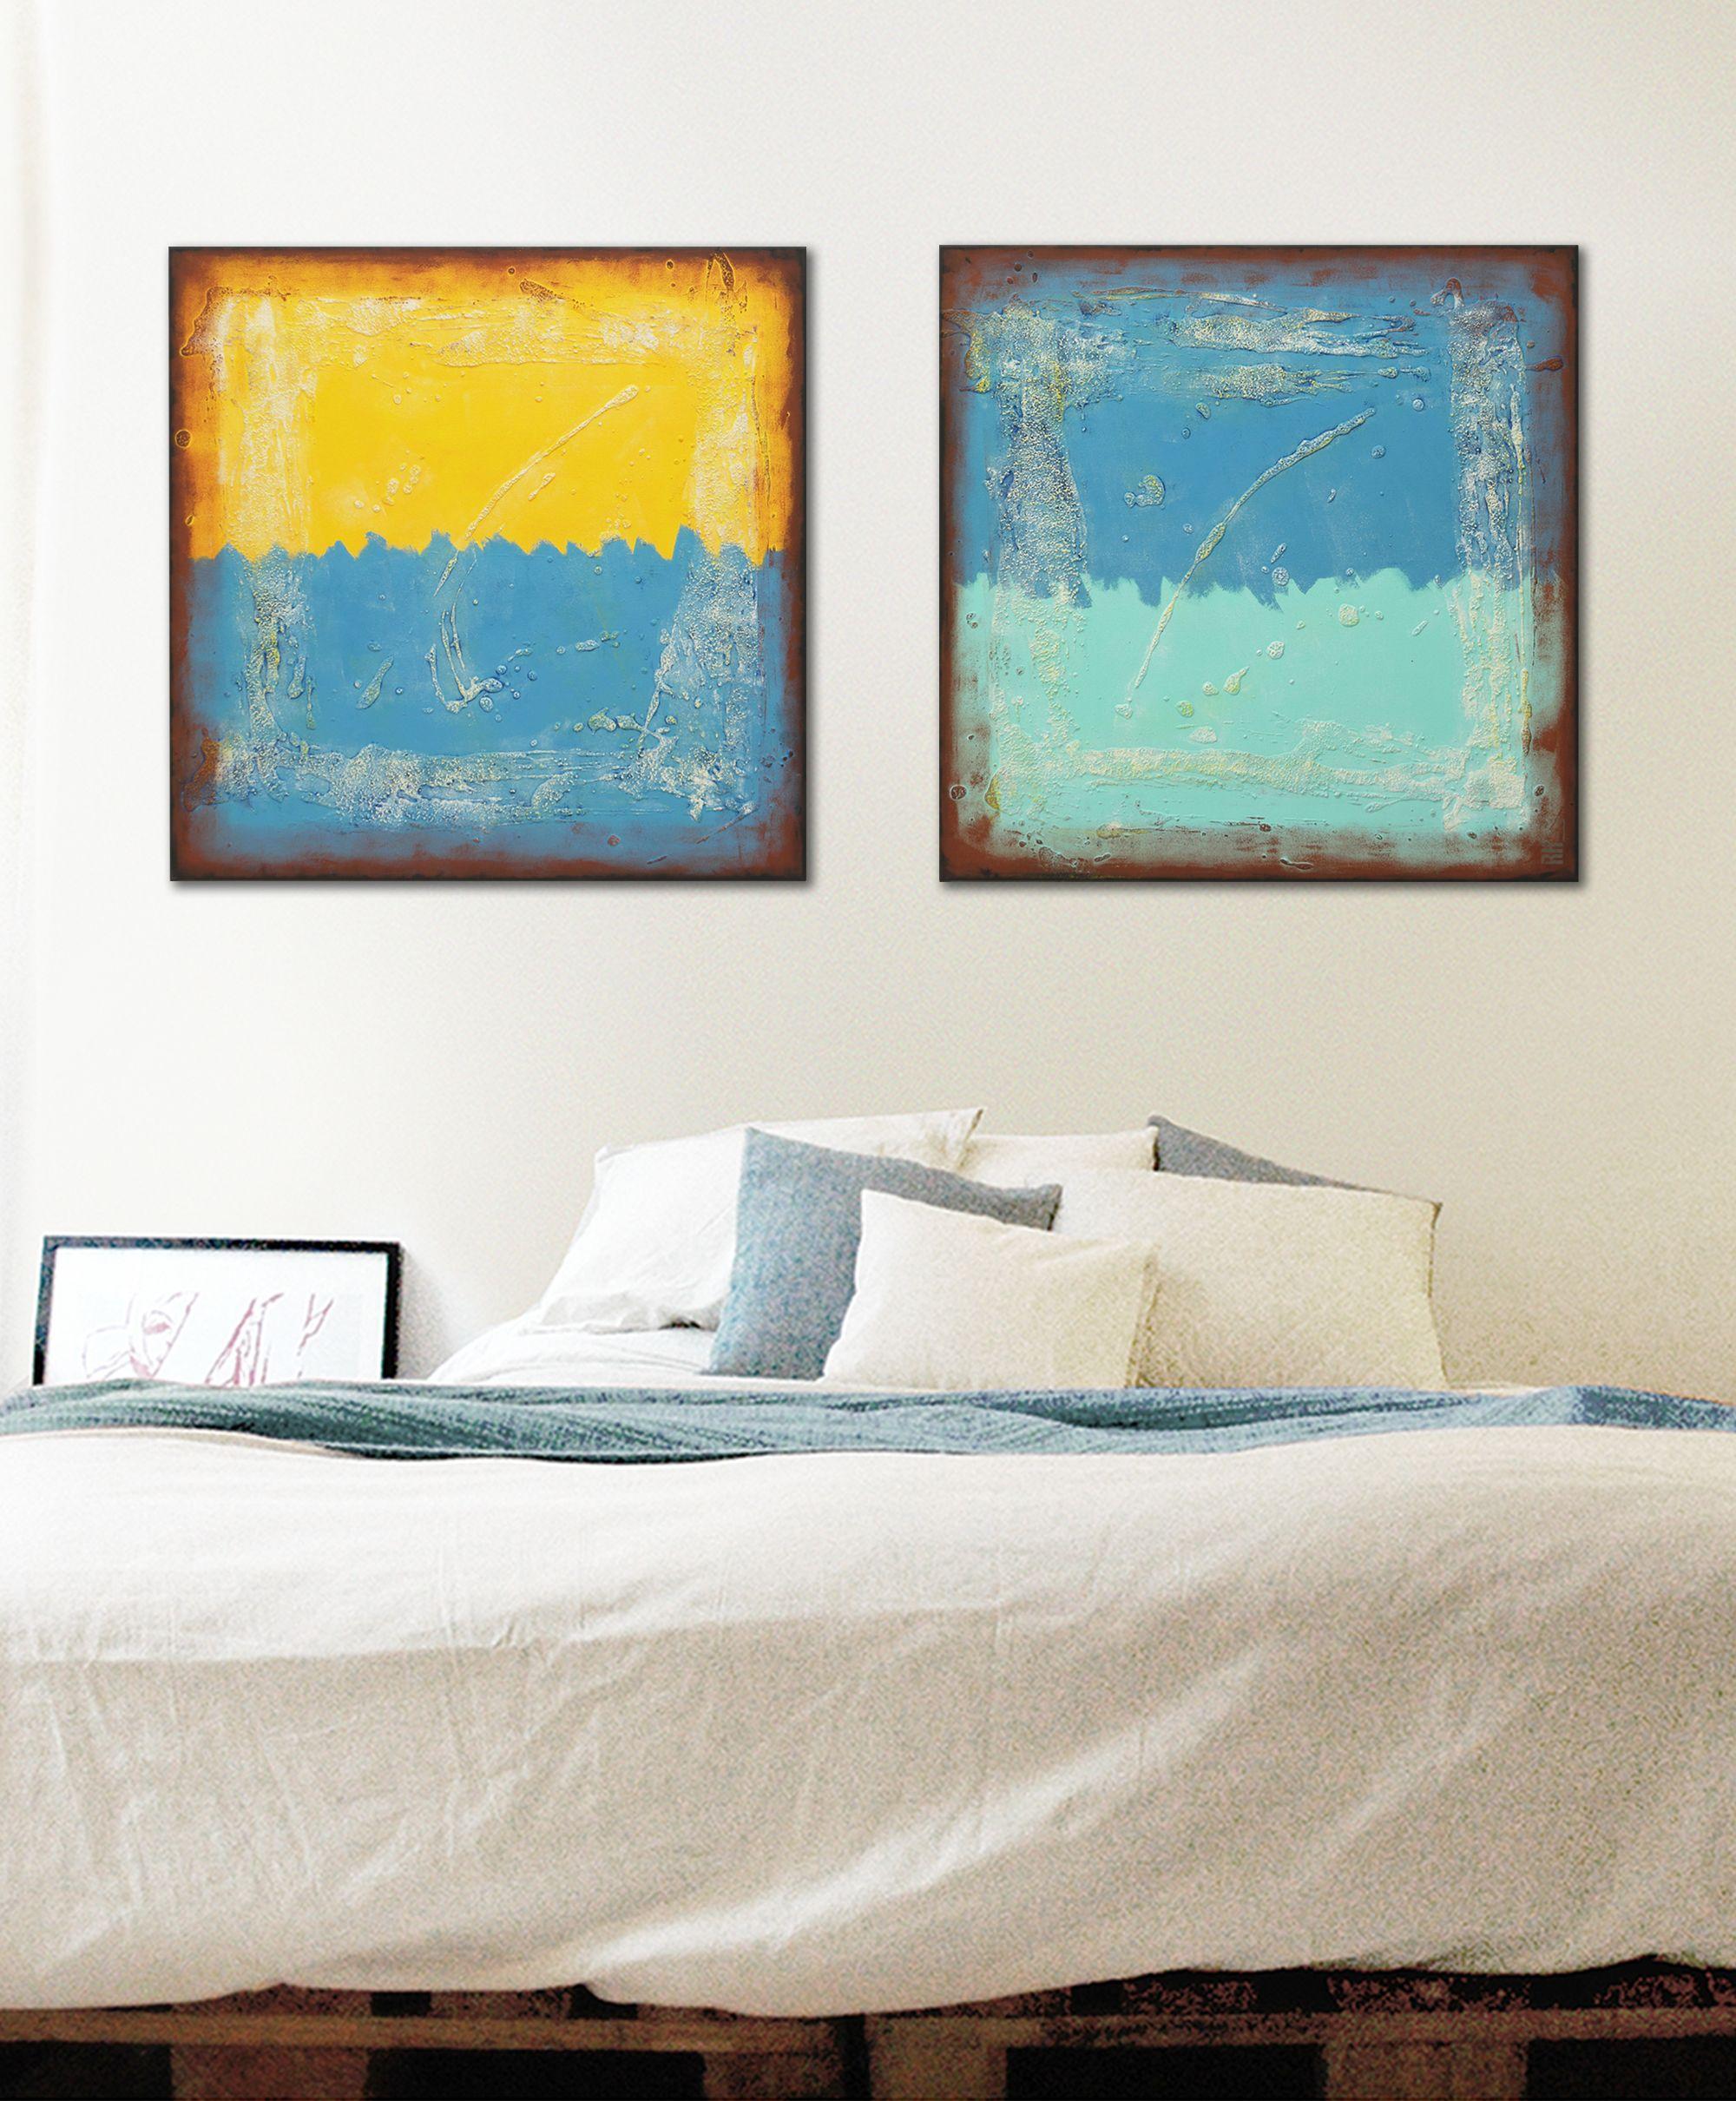 Acrylic Abstract Painting, Original artwork created by Ronald Hunter.    Two in one; this pair of paintings complement each other, or can be used as two separate pieces, to accommodate your personal style or decor. The contrasting colors blue and